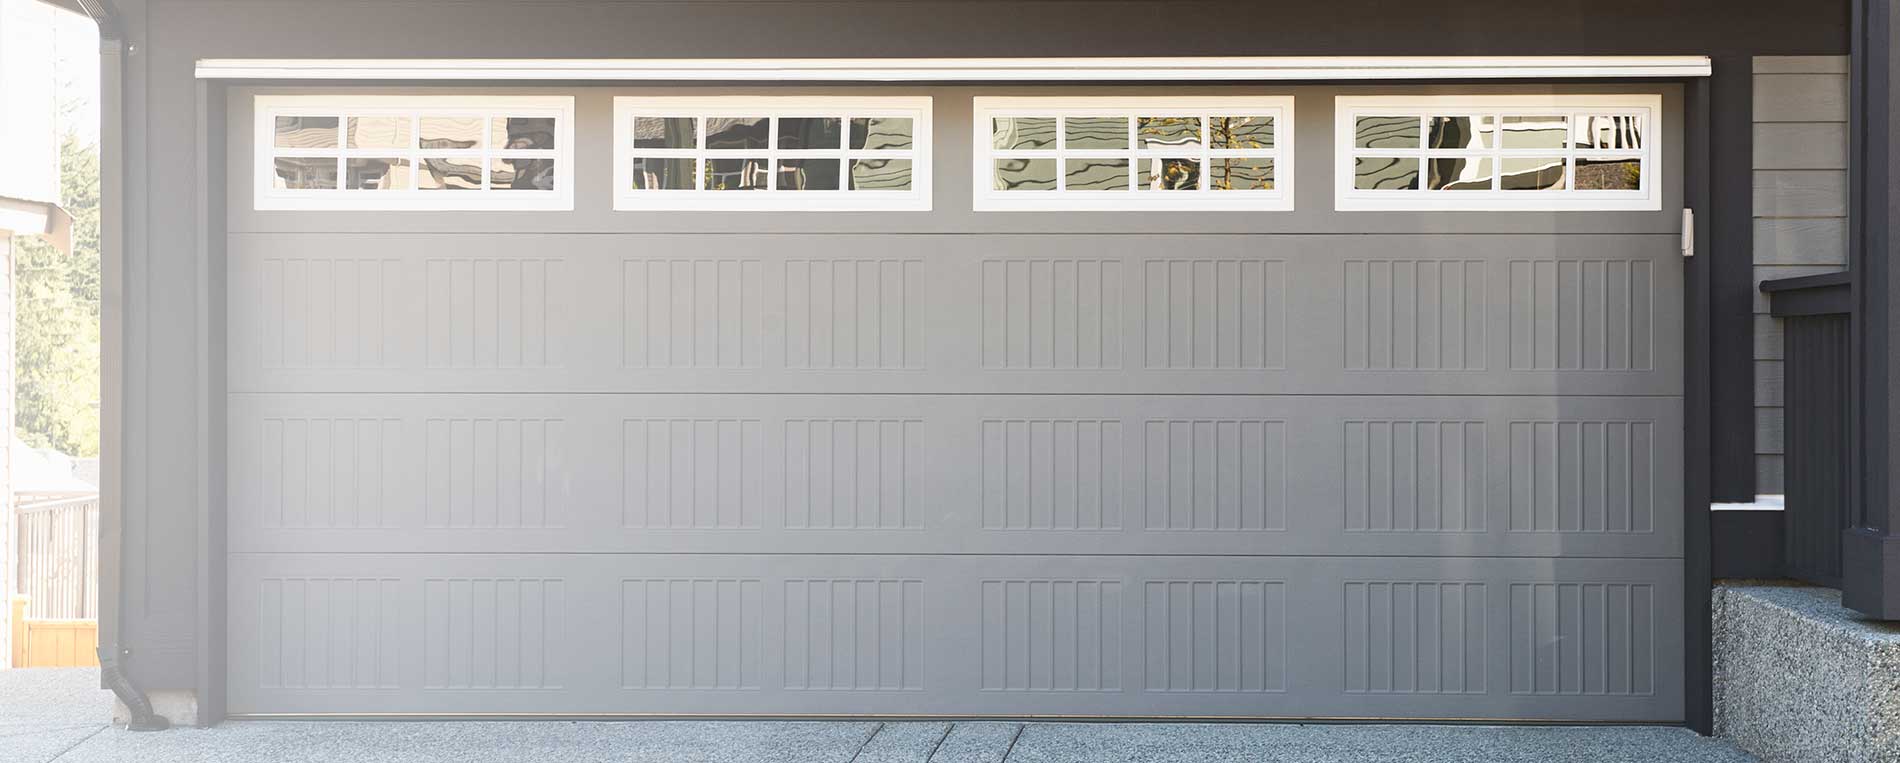 General Safety Tips For Using a Garage Door